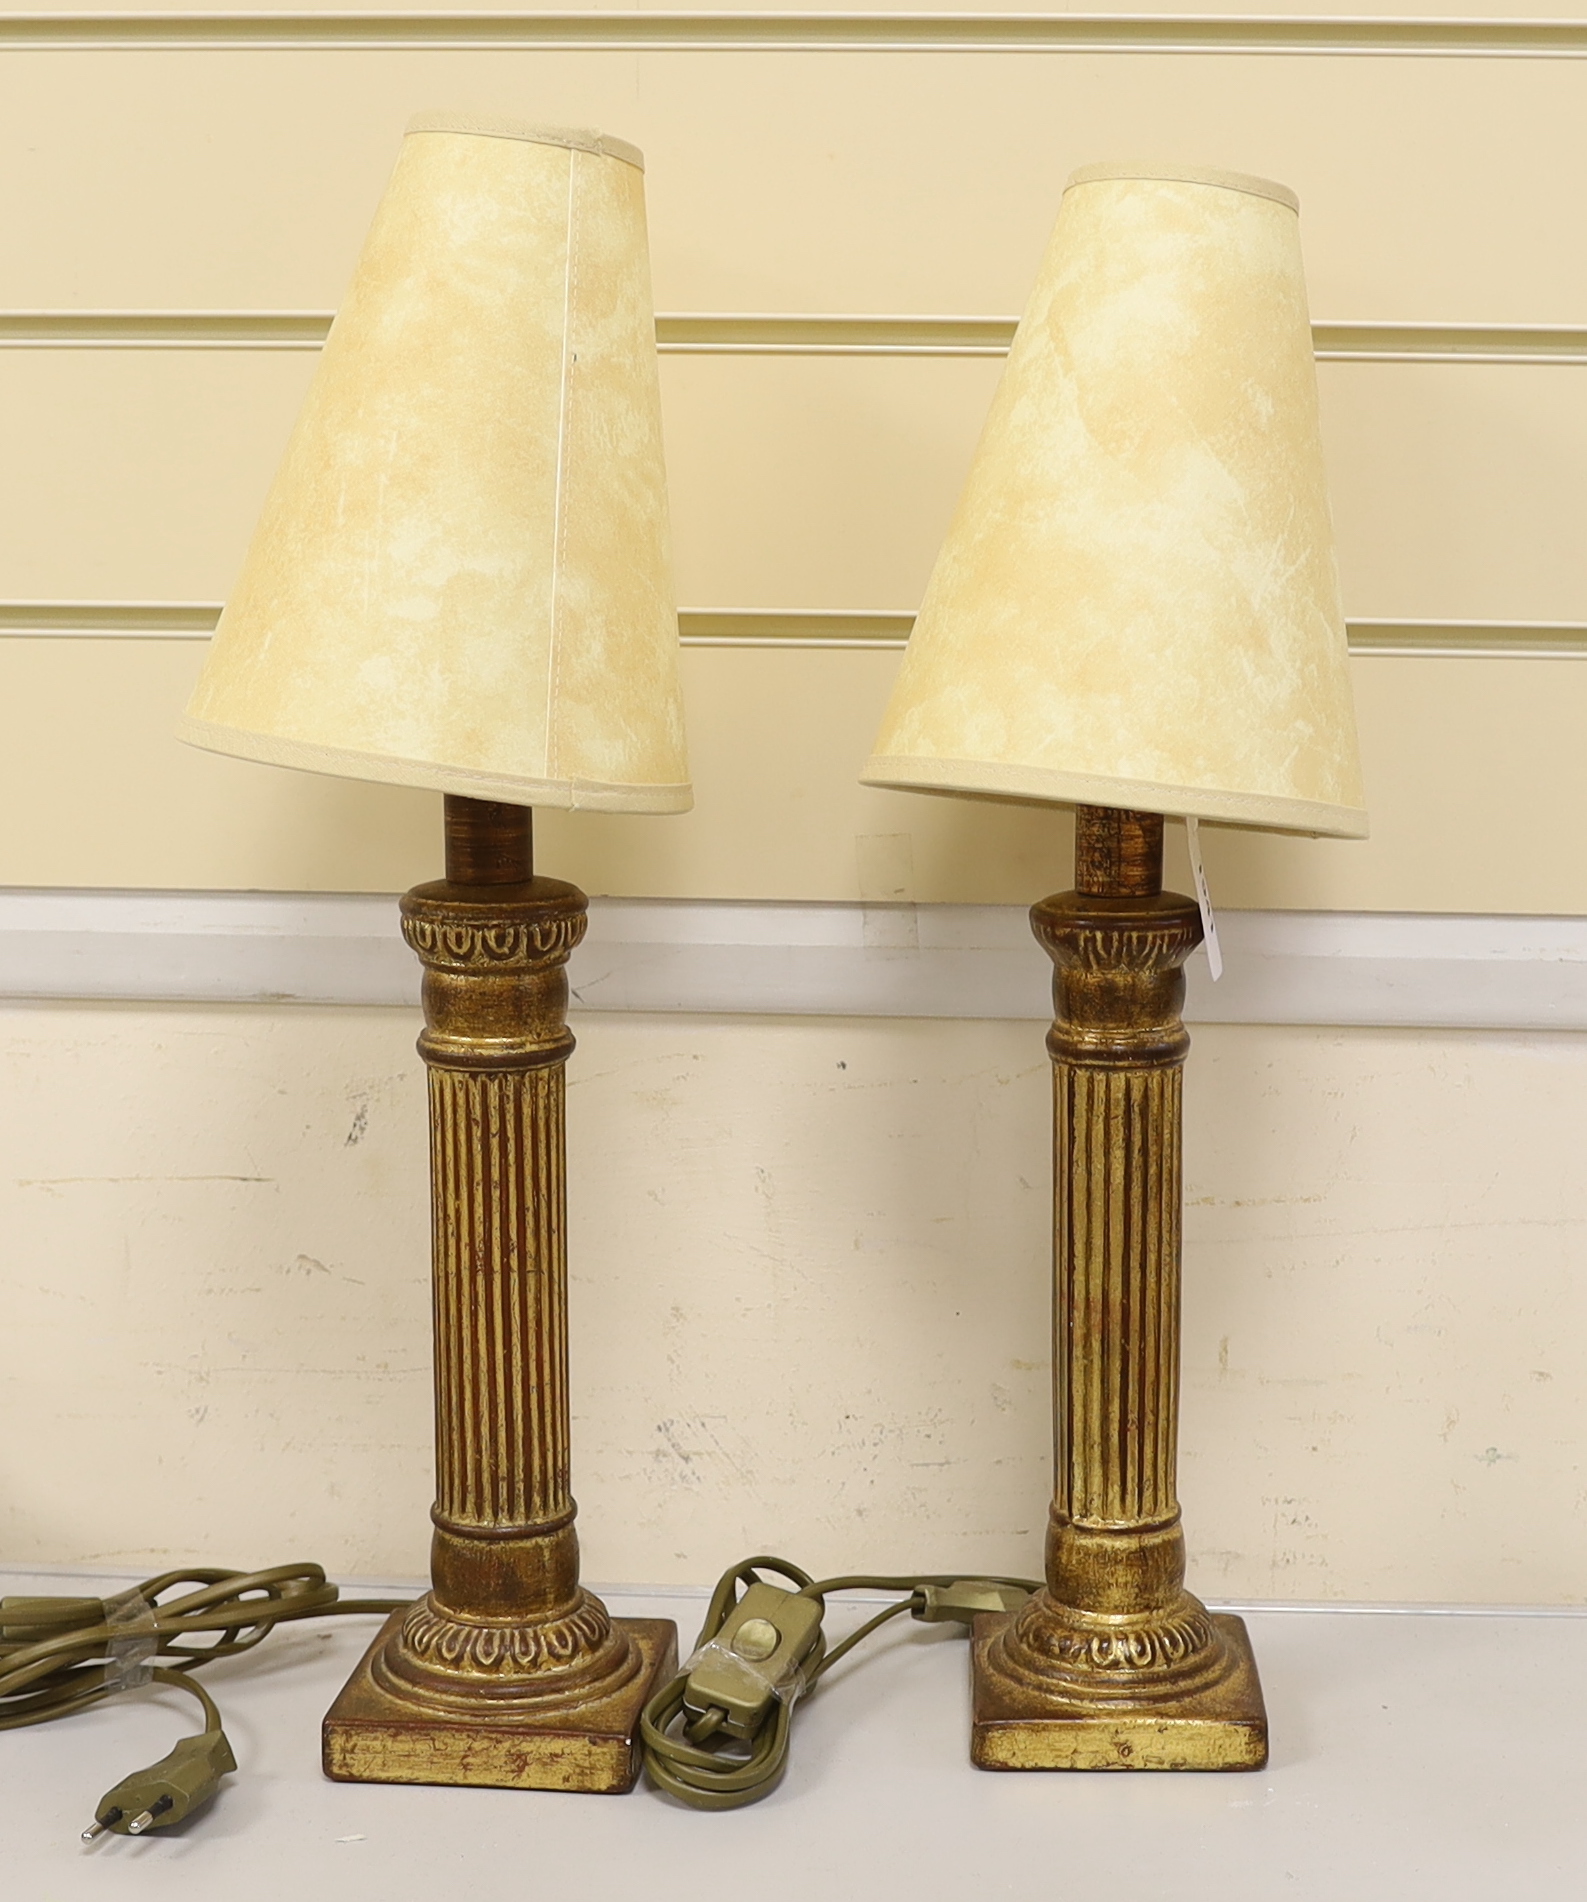 A pair of 20th century Swedish partially gilt table lamps with shades